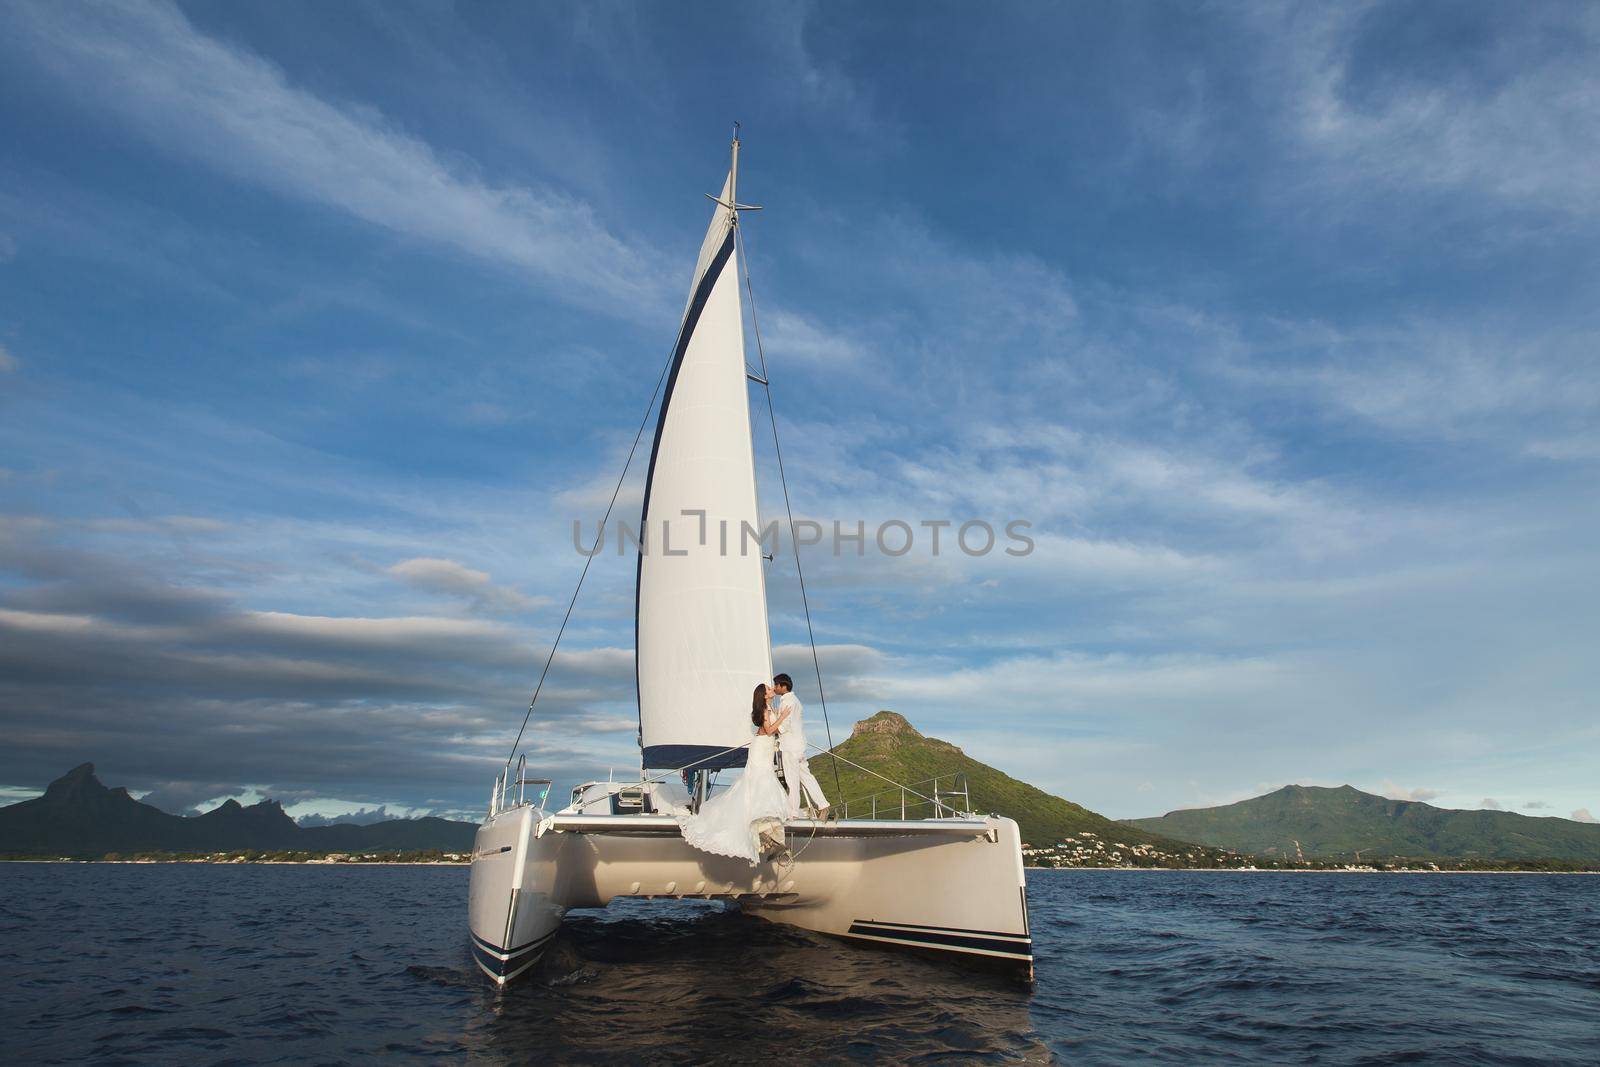 Beautiful wedding couple bride and groom on yacht at wedding day outdoors in the sea. Happy marriage couple kissing on boat in ocean. Stylish Marine wedding by StudioPeace